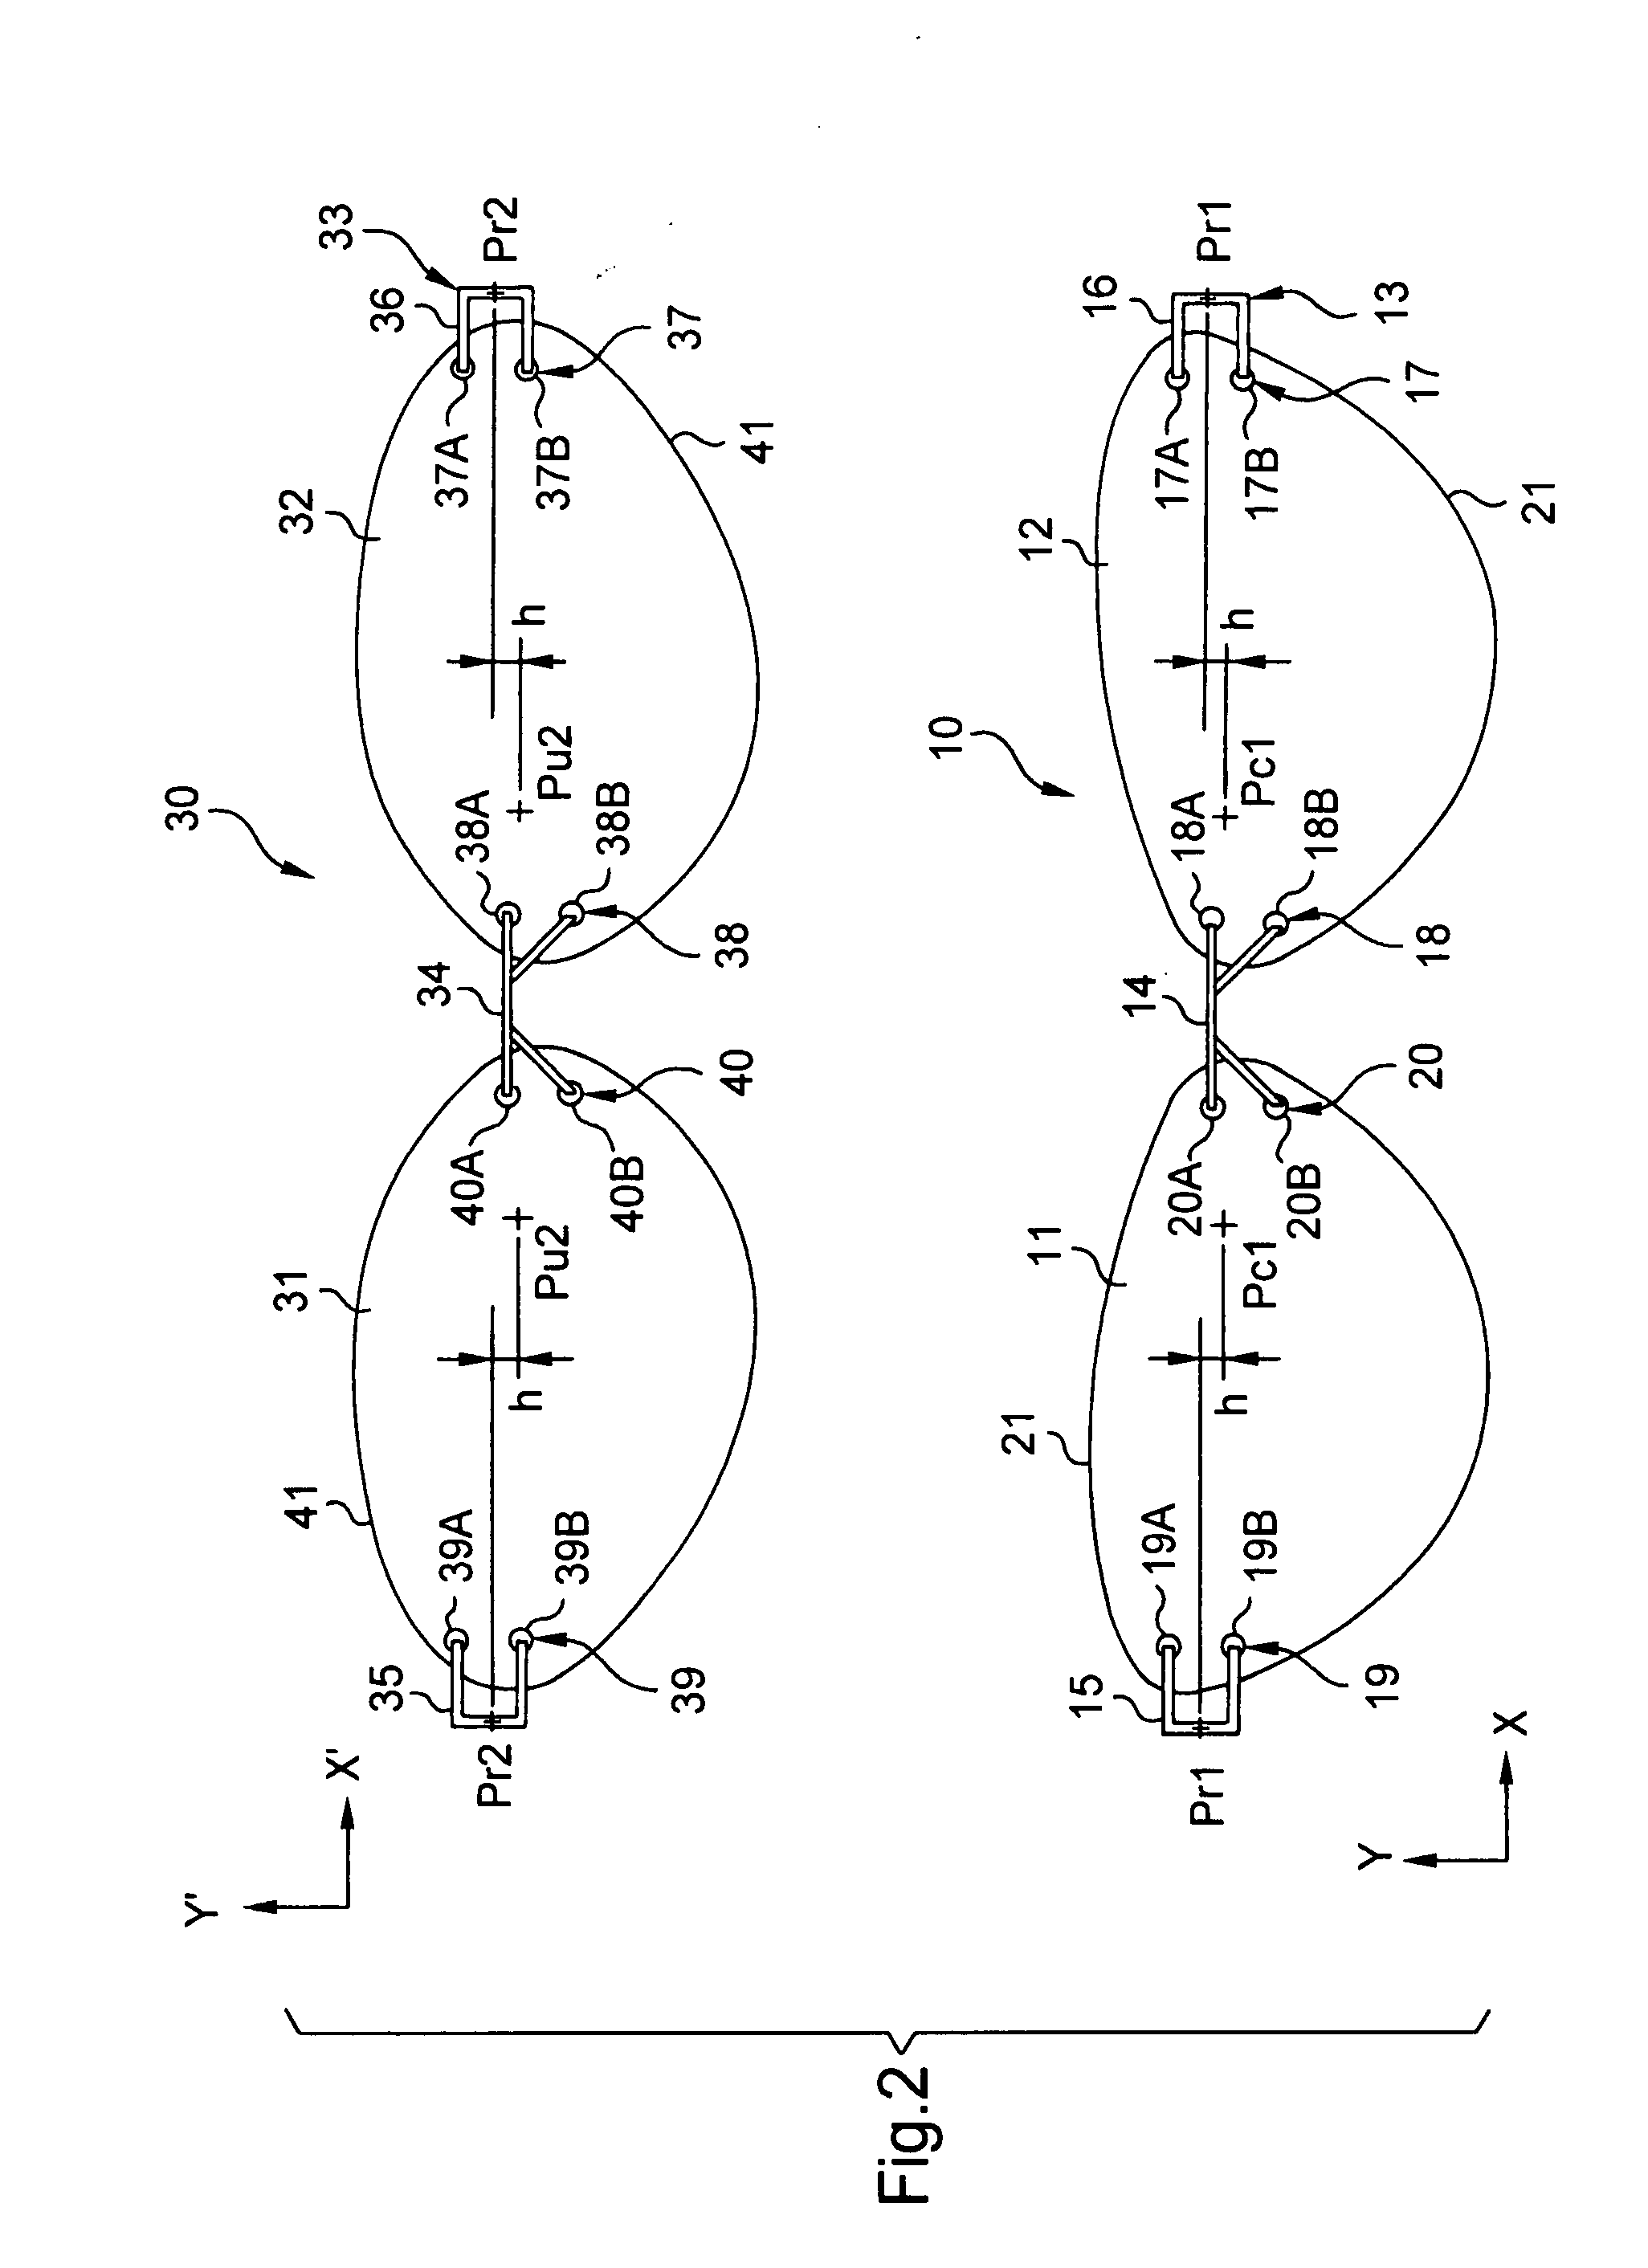 Method of Centering an Ophthalmic Lens on a Rimless Frame